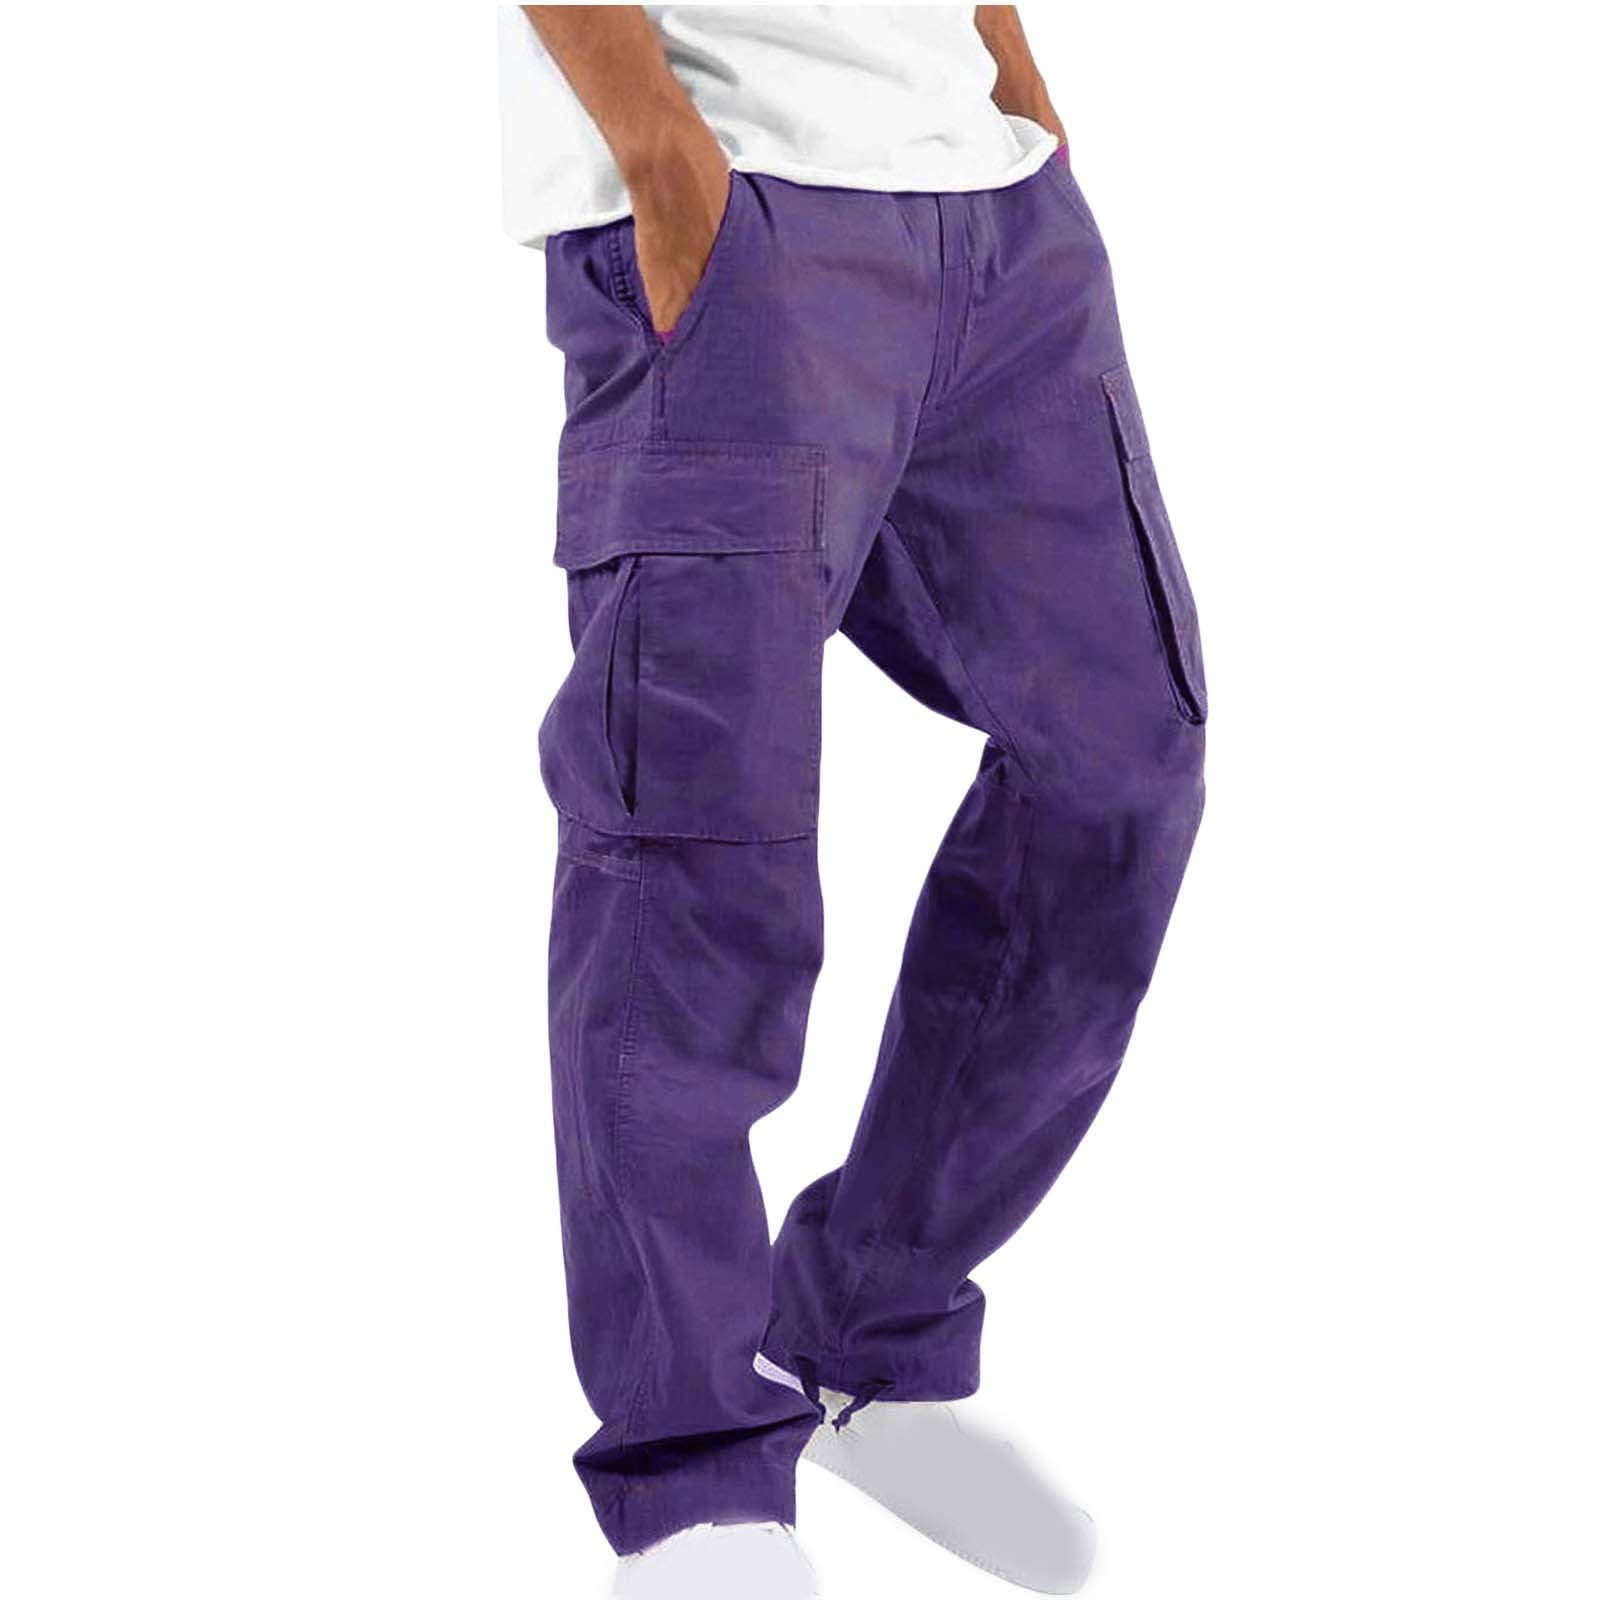 Men's Pants & Trousers Sale, Up To 70% Off | Axel's Outpost